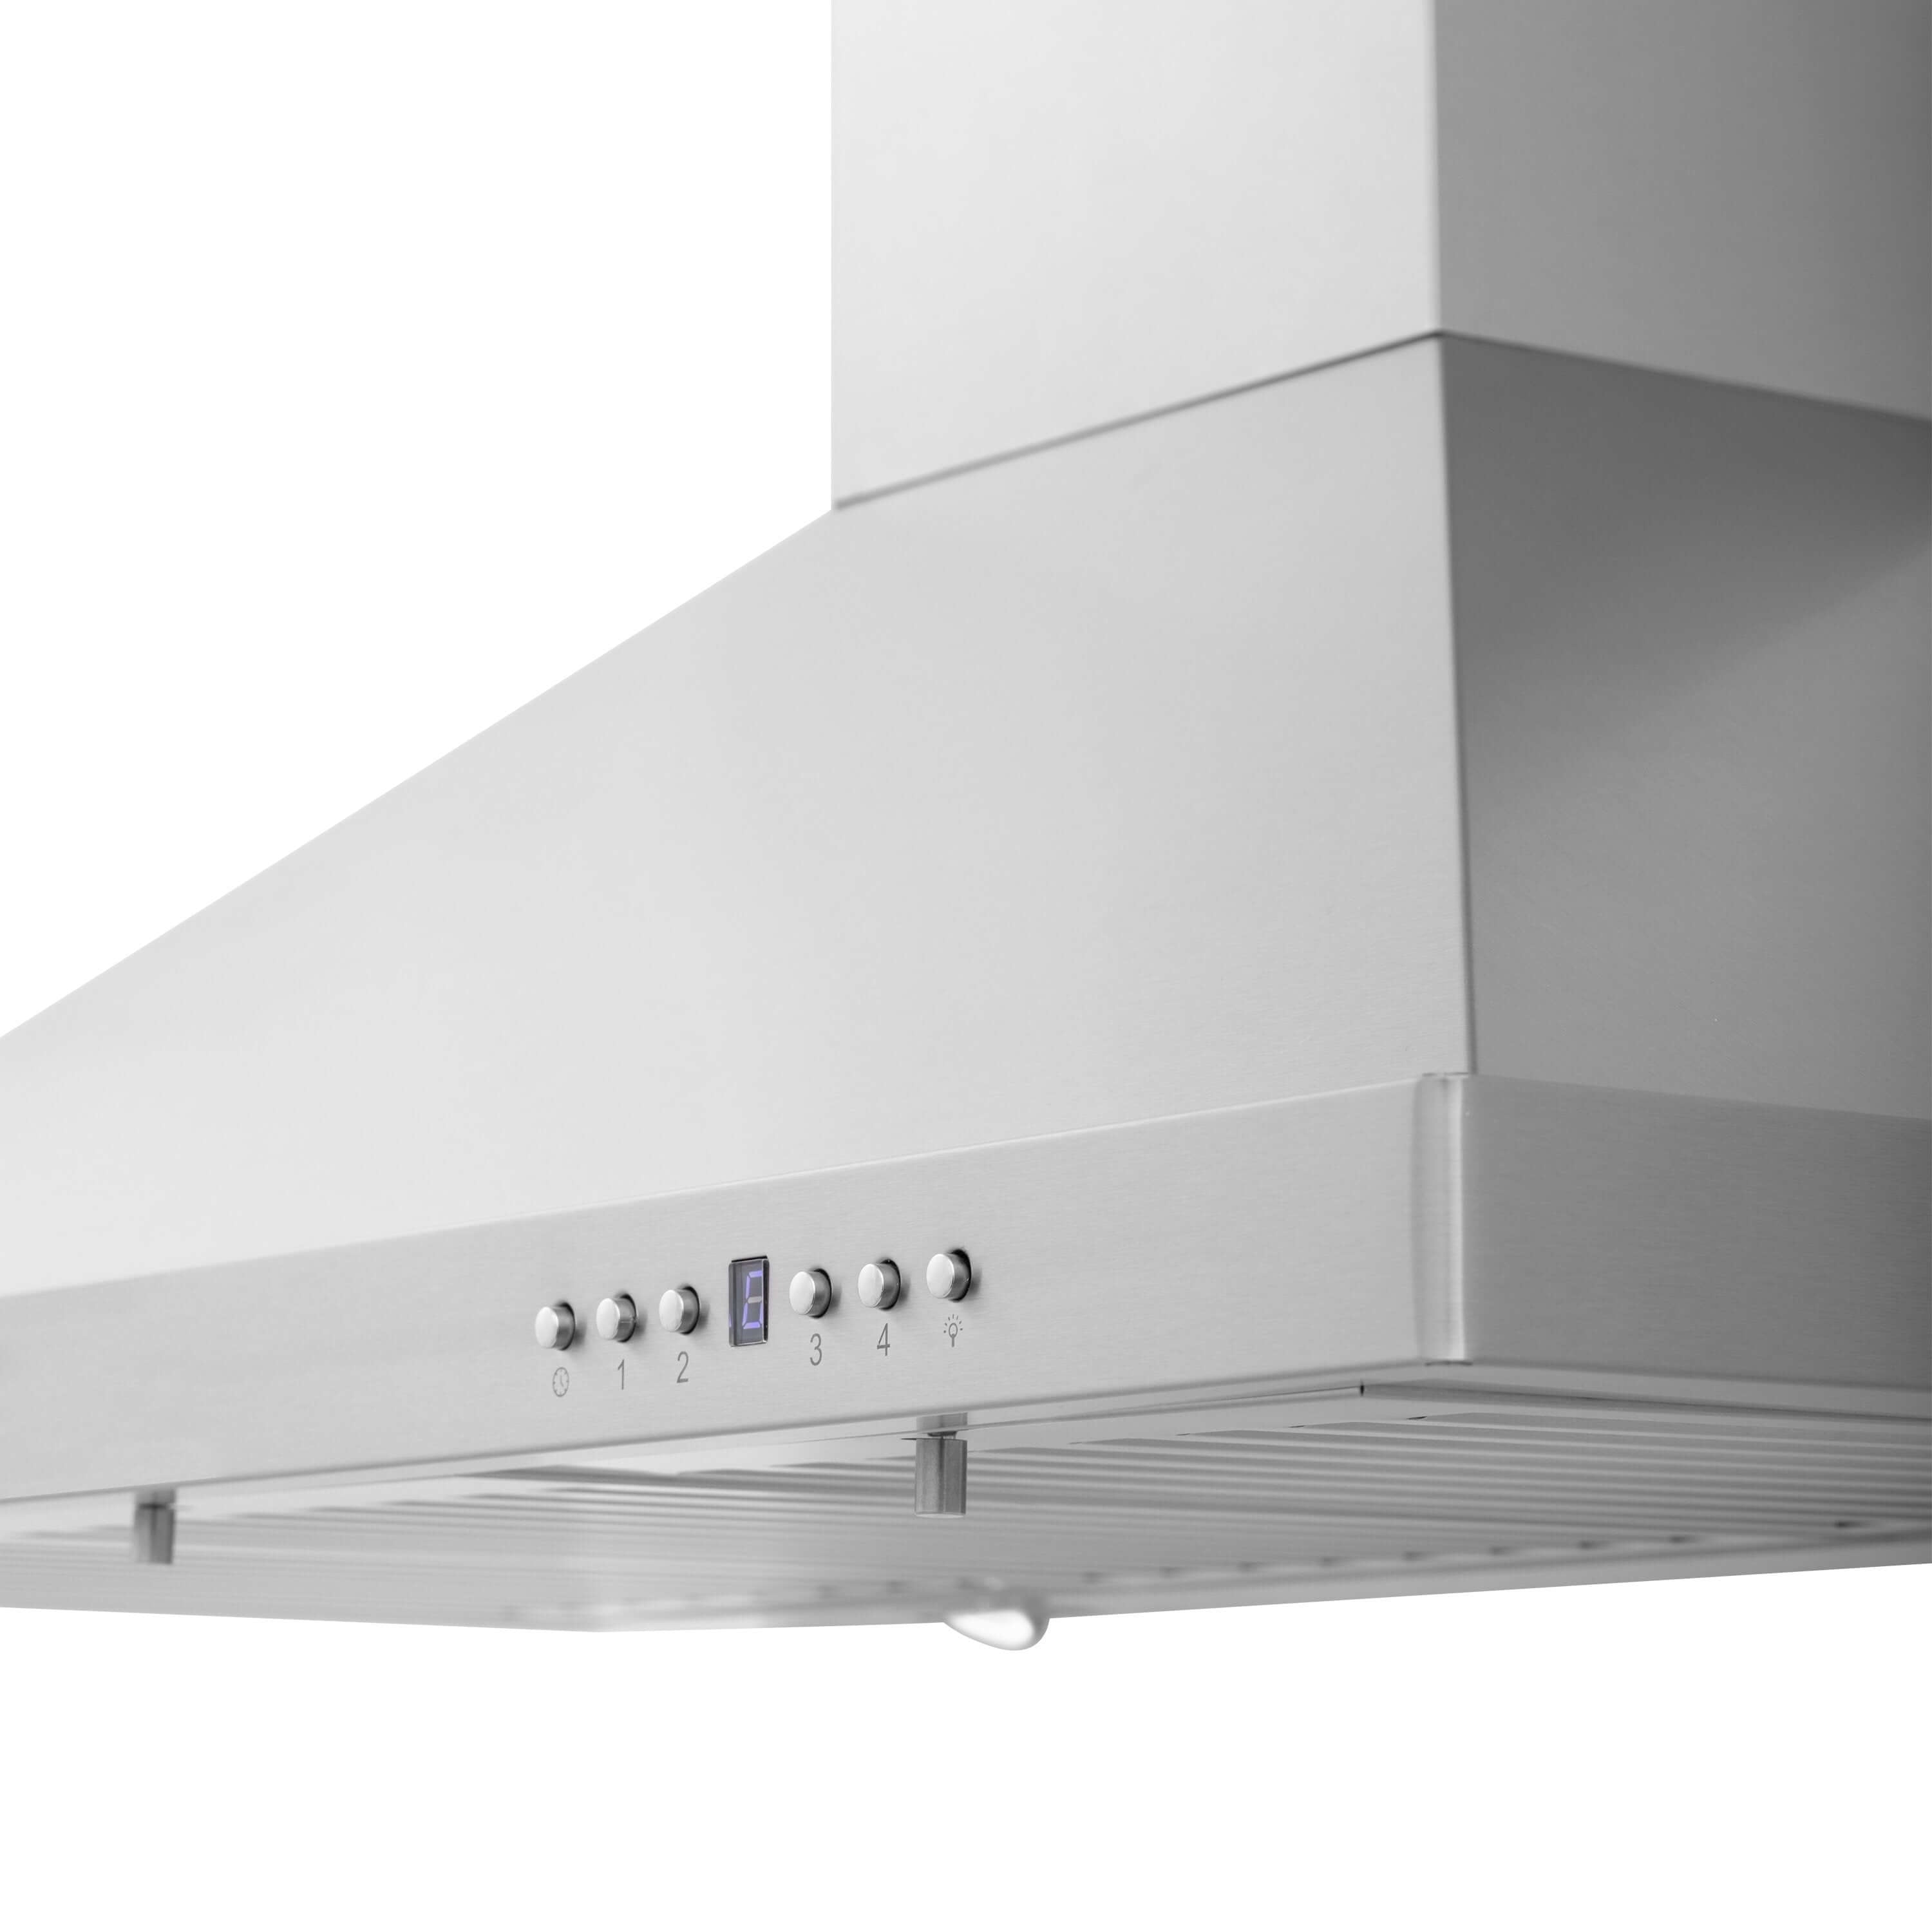 ZLINE Wall Mount Range Hood (KB) button panel, display, and stainless steel chimney details.